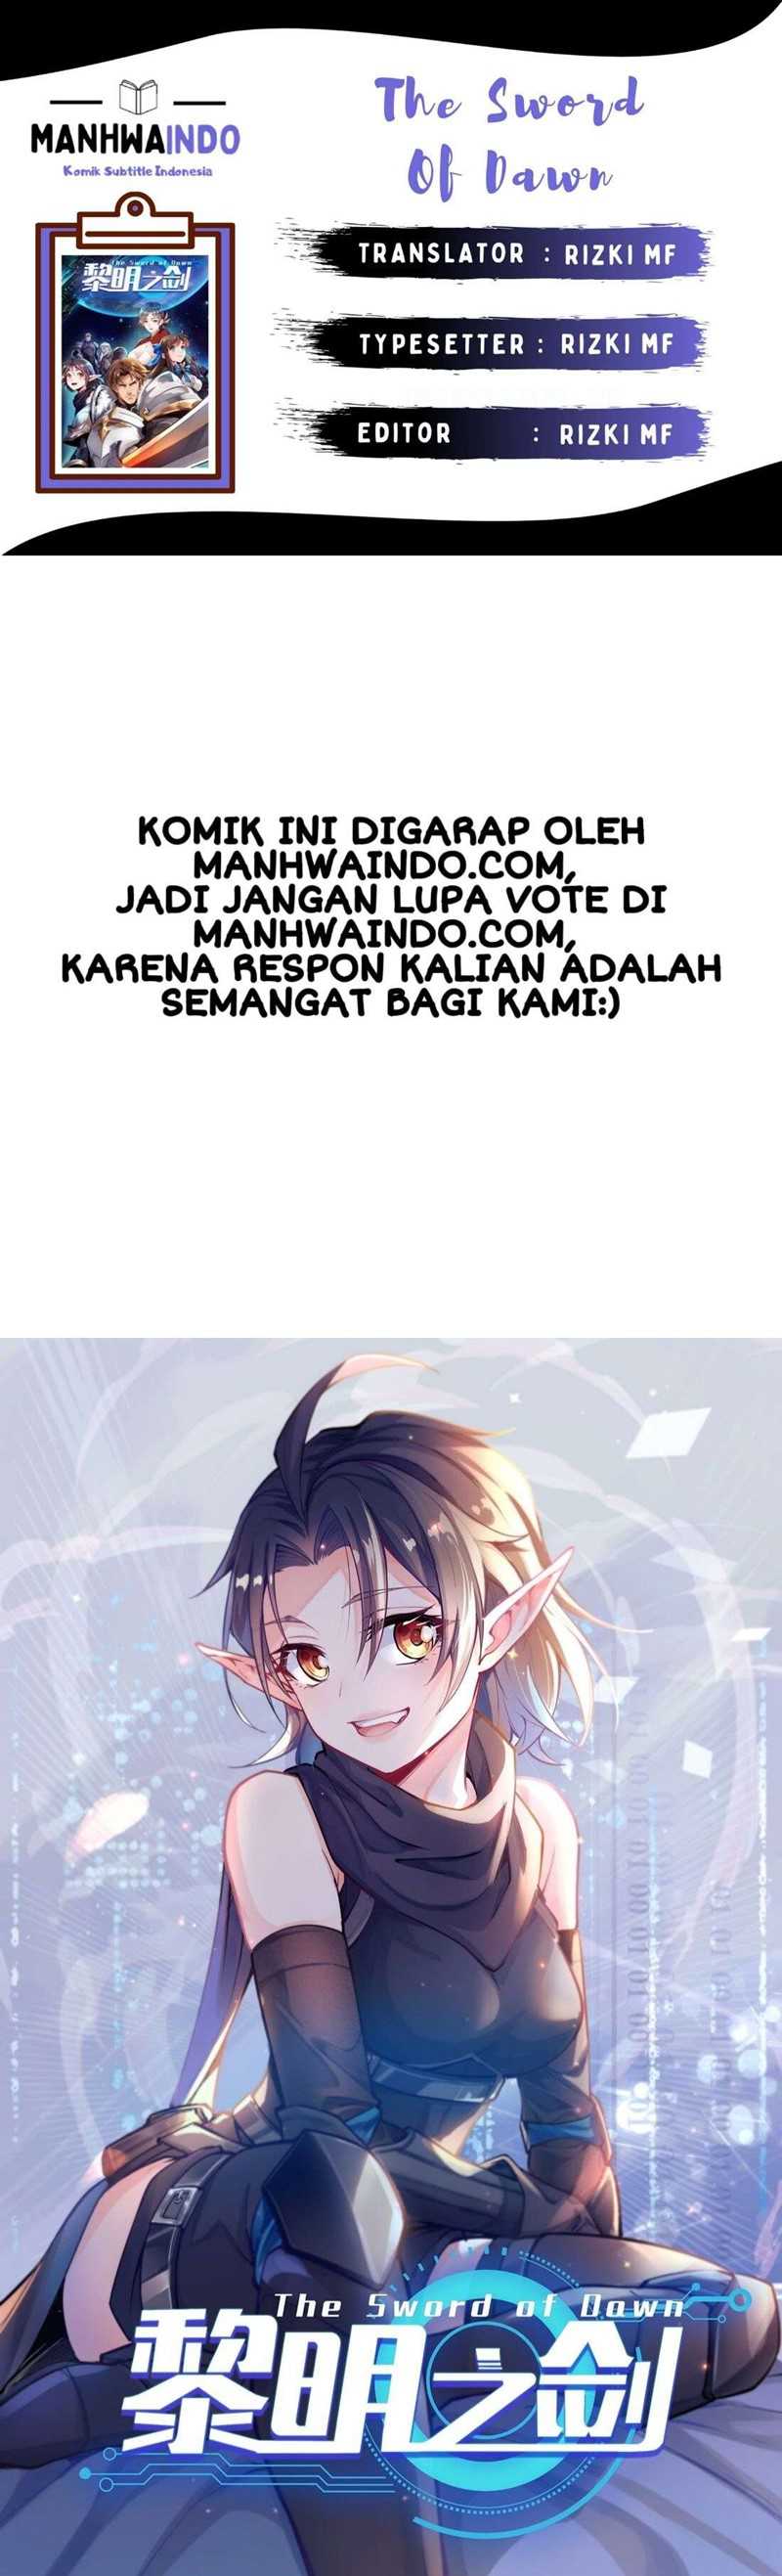 The Sword of Dawn Chapter 05